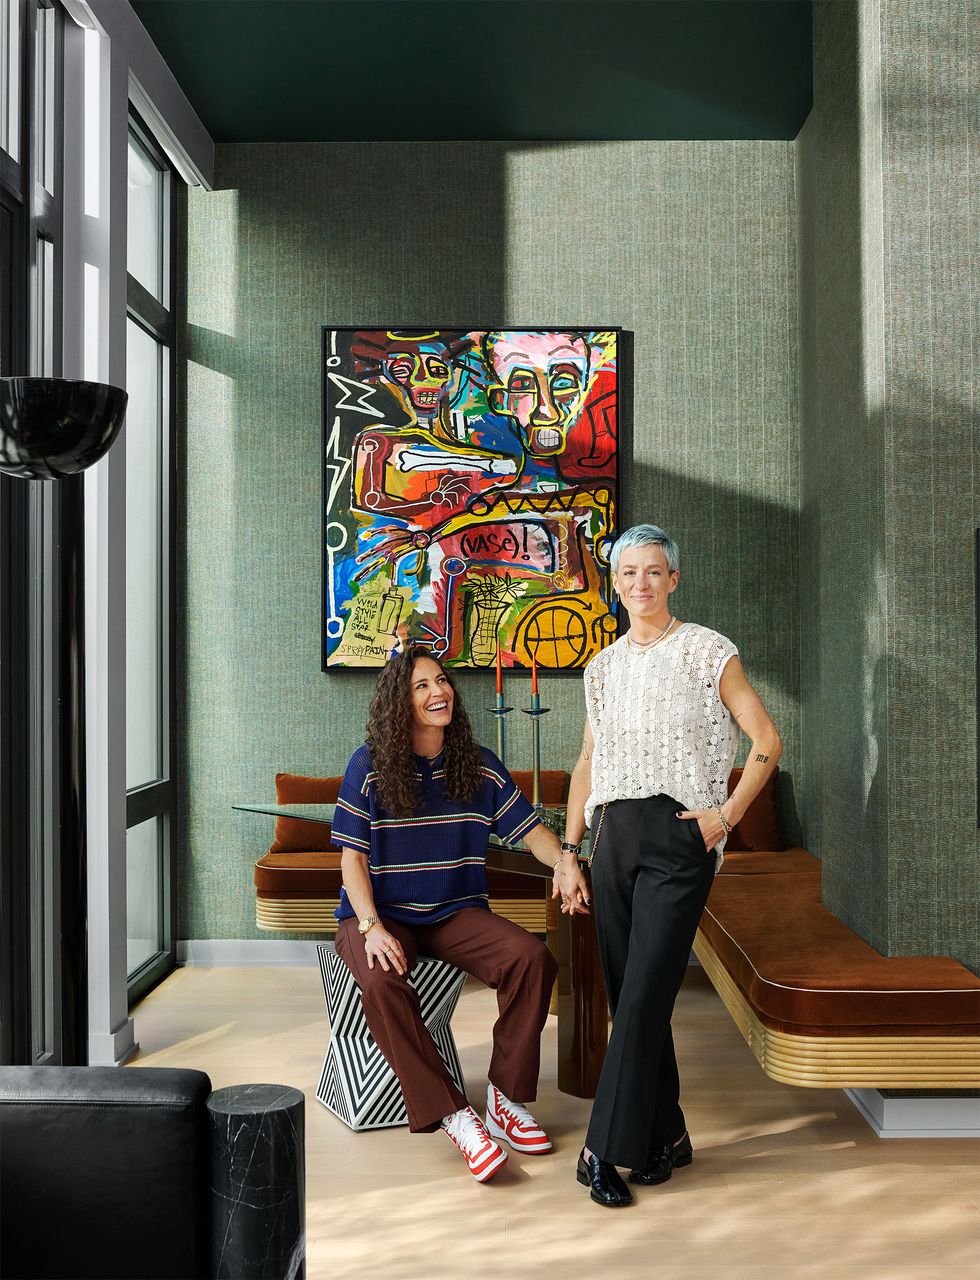 sue bird sits on a black and white patterned stool with megan rapinoe standing beside her in a dining room with a glass table and brown suede banquette against green textured walls and a colorful abstract painting